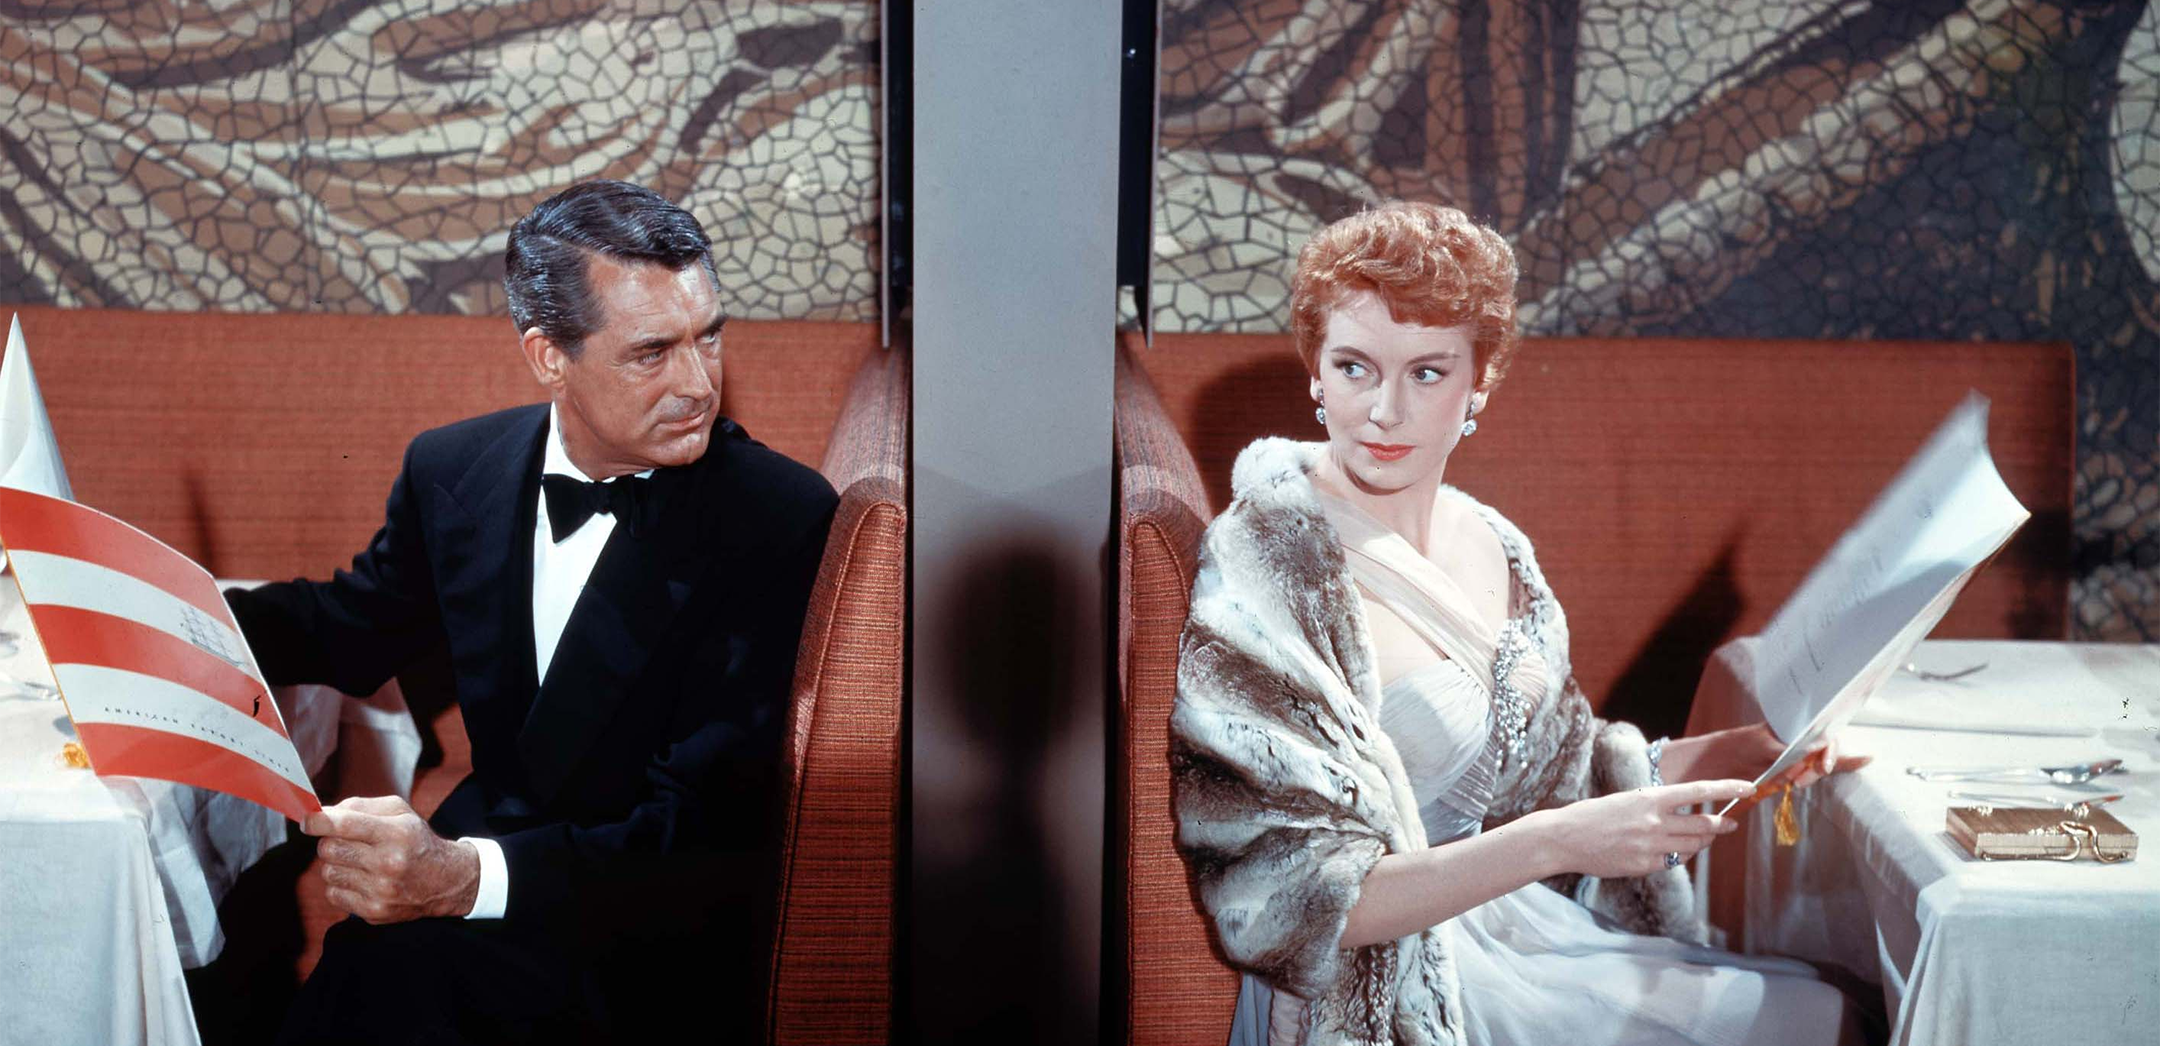 Cary Grant (Nicky Ferrante) looks quizzically at Deborah Kerr (Terry McKay) as they sit back to back in the orange booths of the trans-Atlantic ocean liner's dining room. 